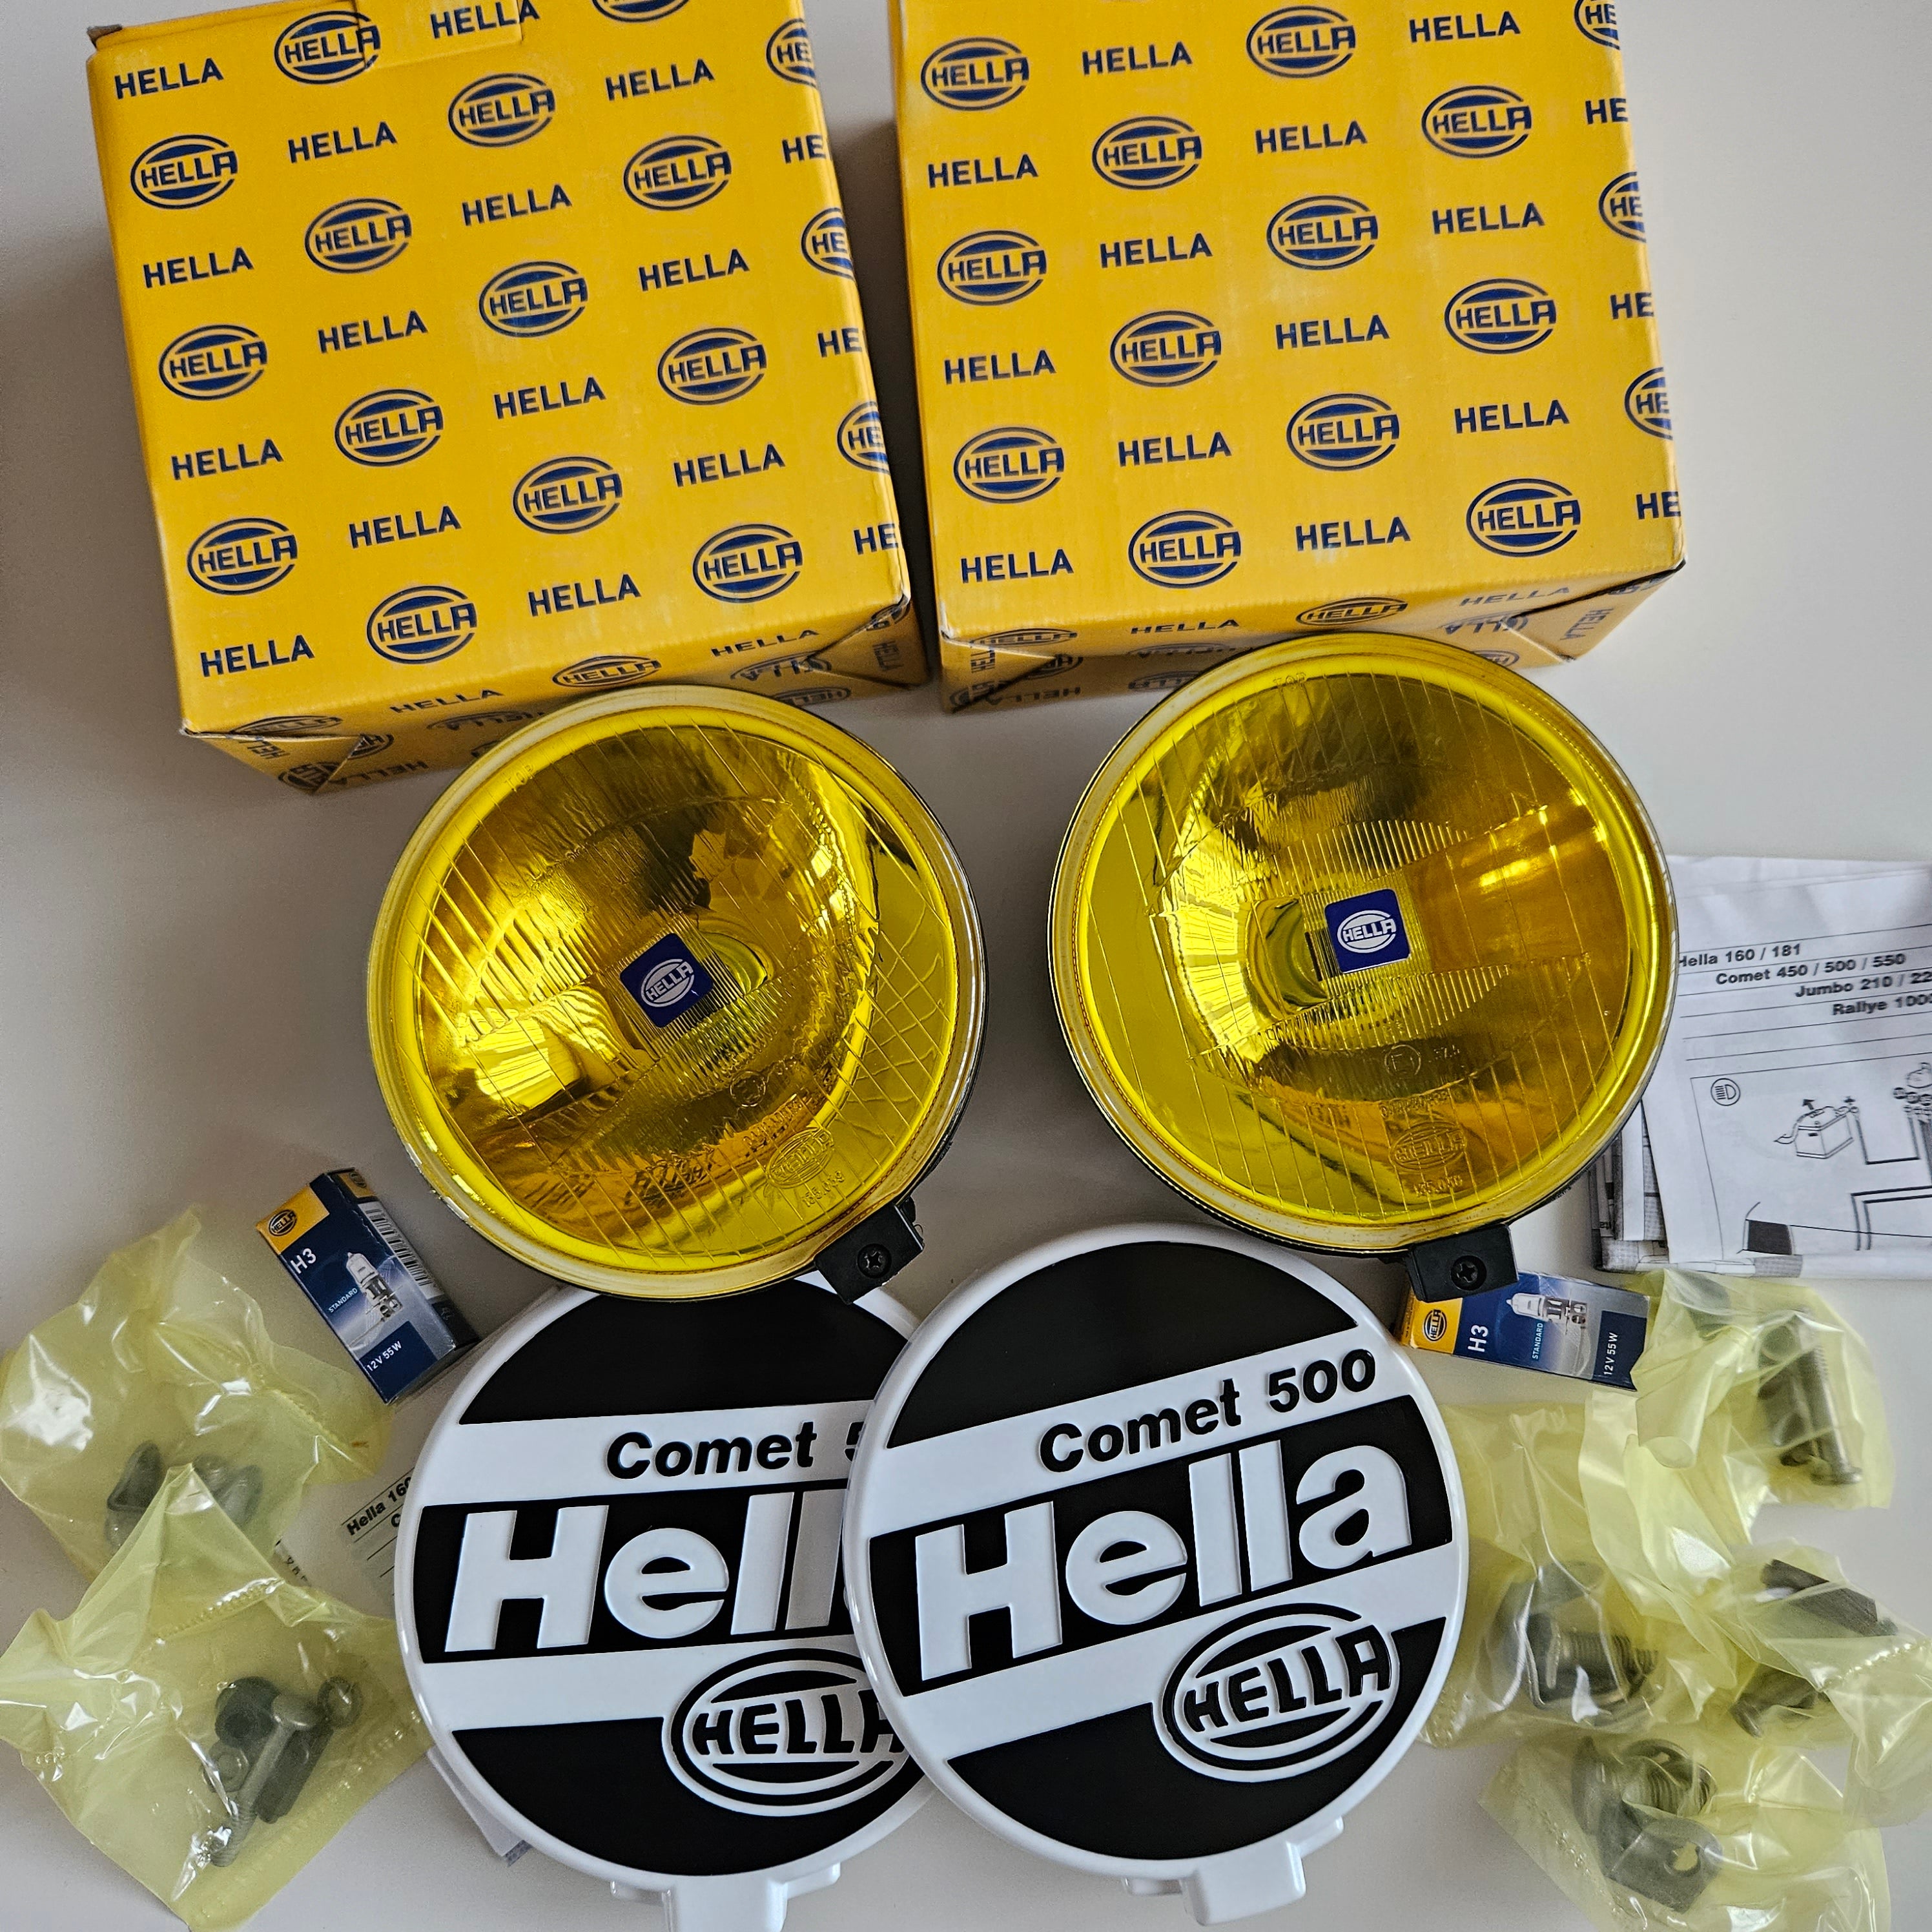 HELLA 358116991 Yellow Stone Shield for comet 500 value Fit LED